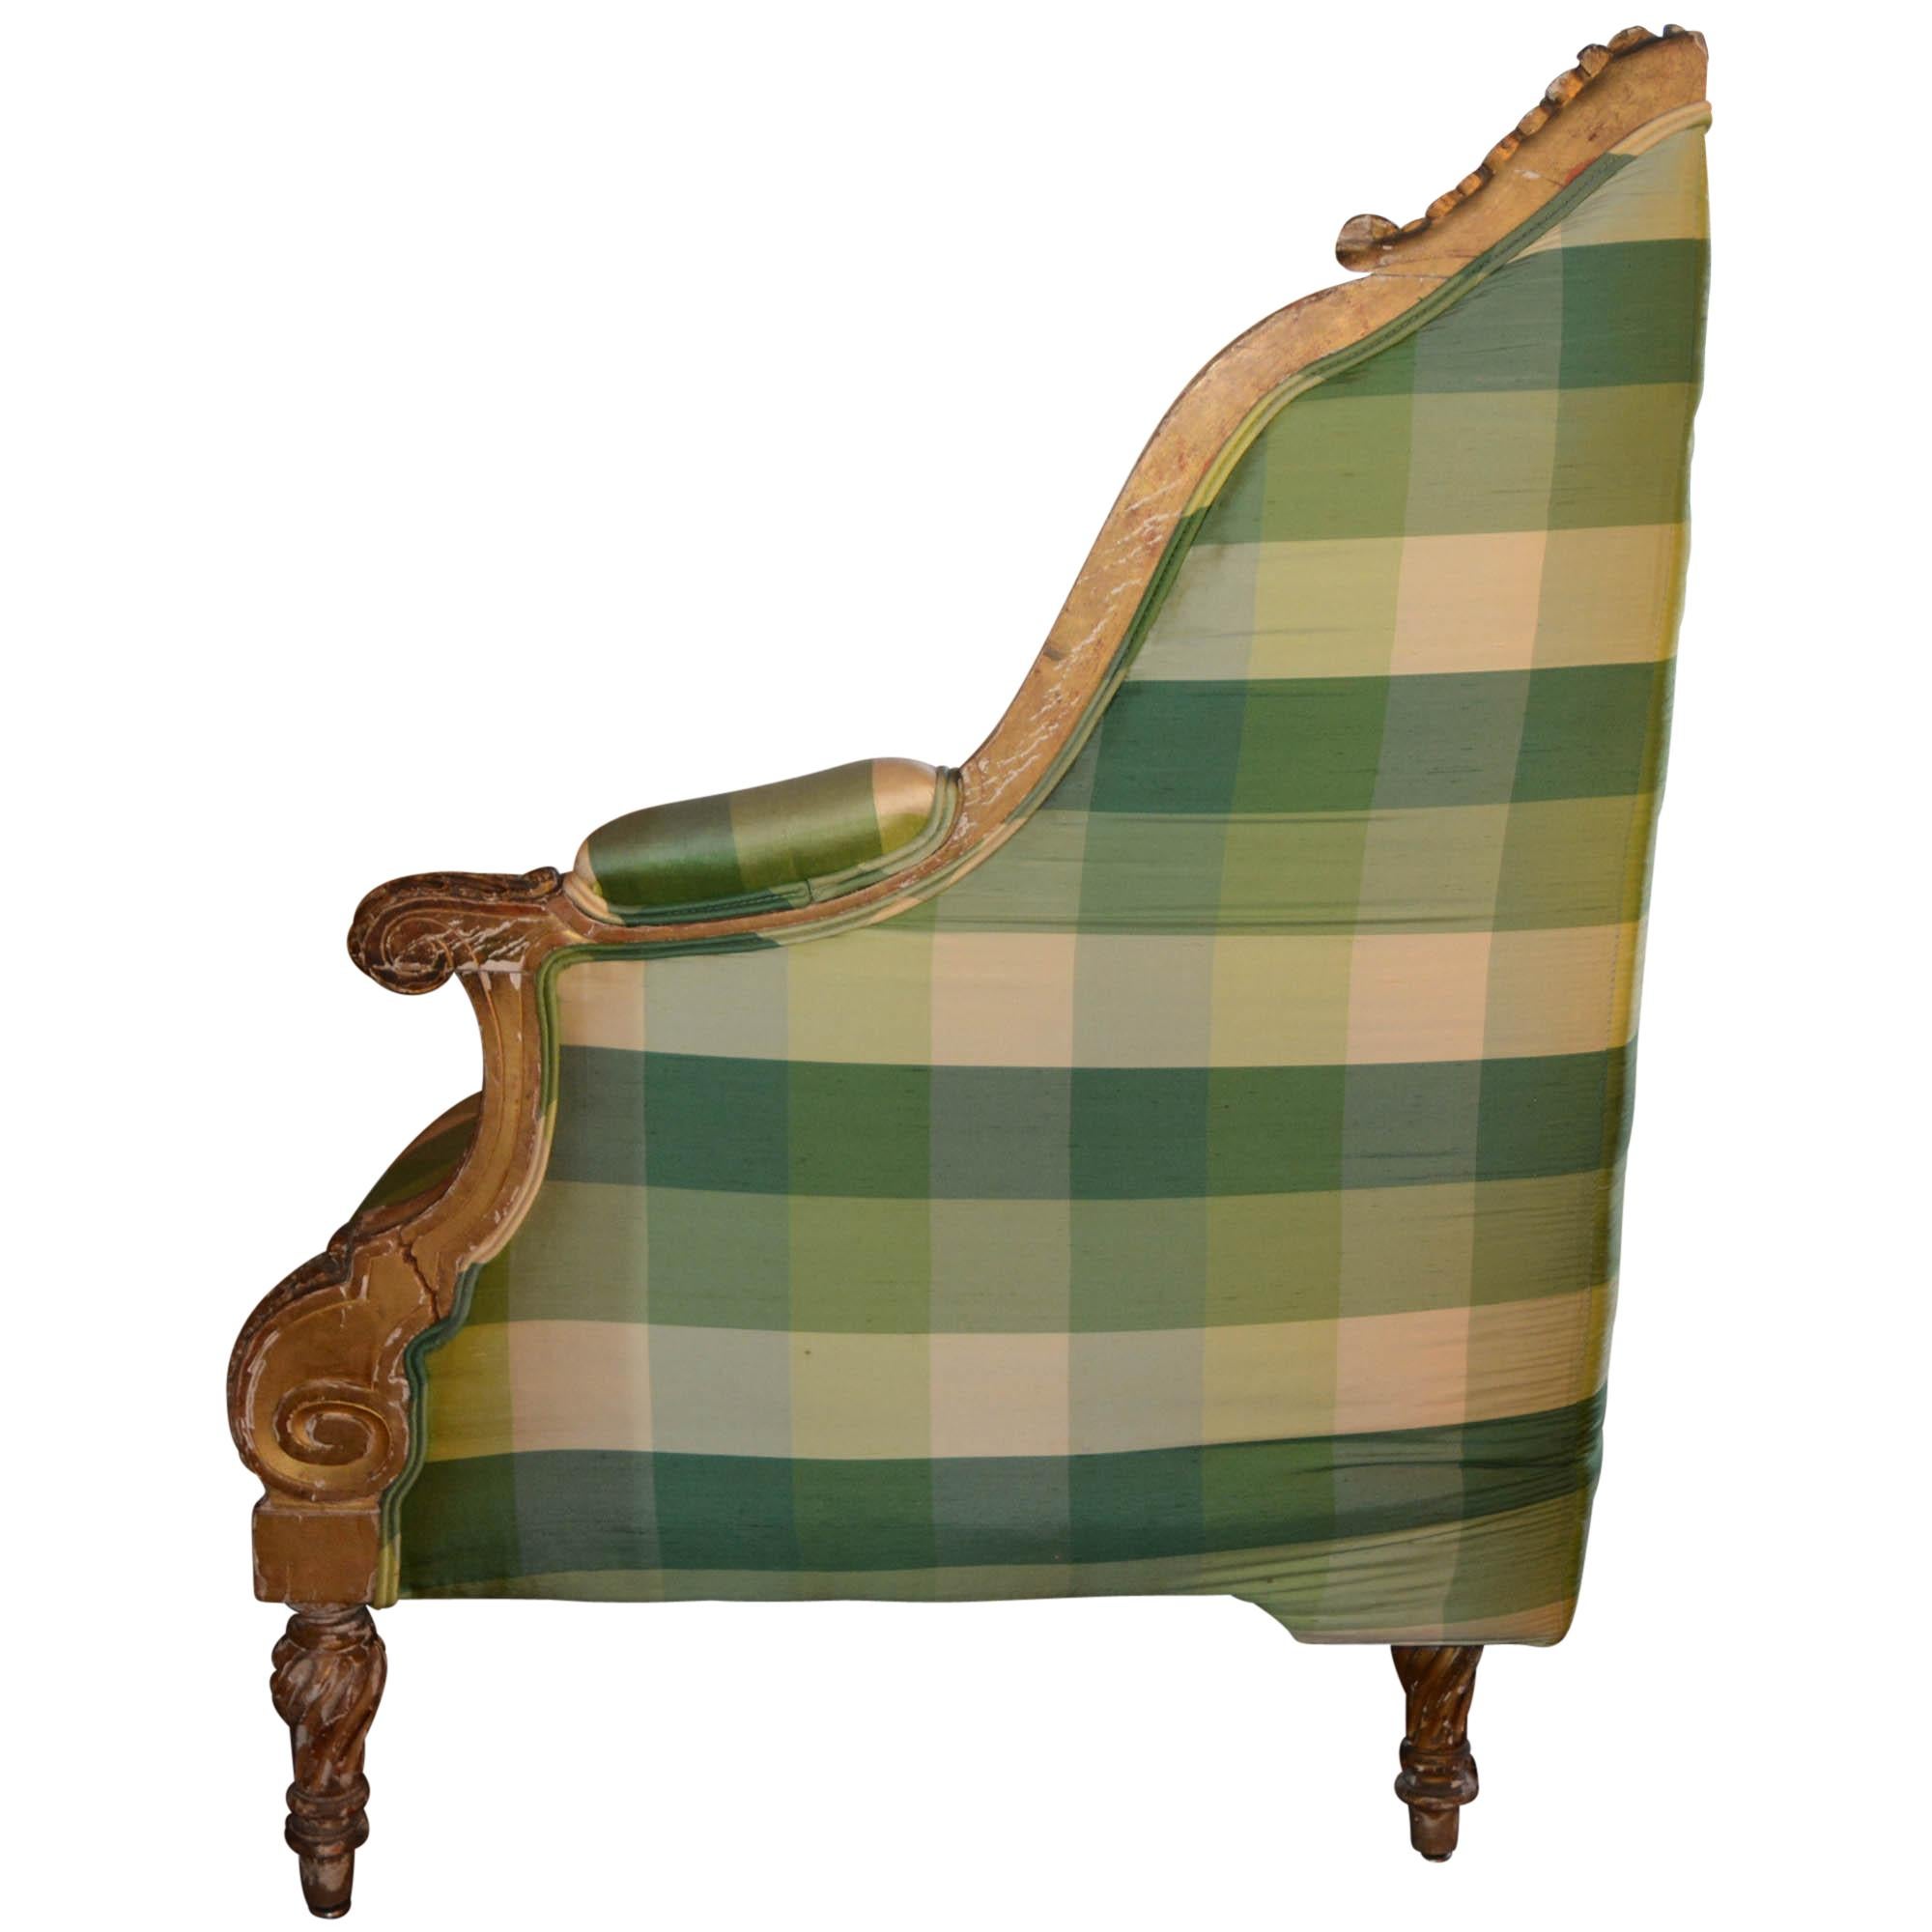 Antique Carved Corner Chair Silk Plaid Upholstery In Distressed Condition For Sale In Pataskala, OH